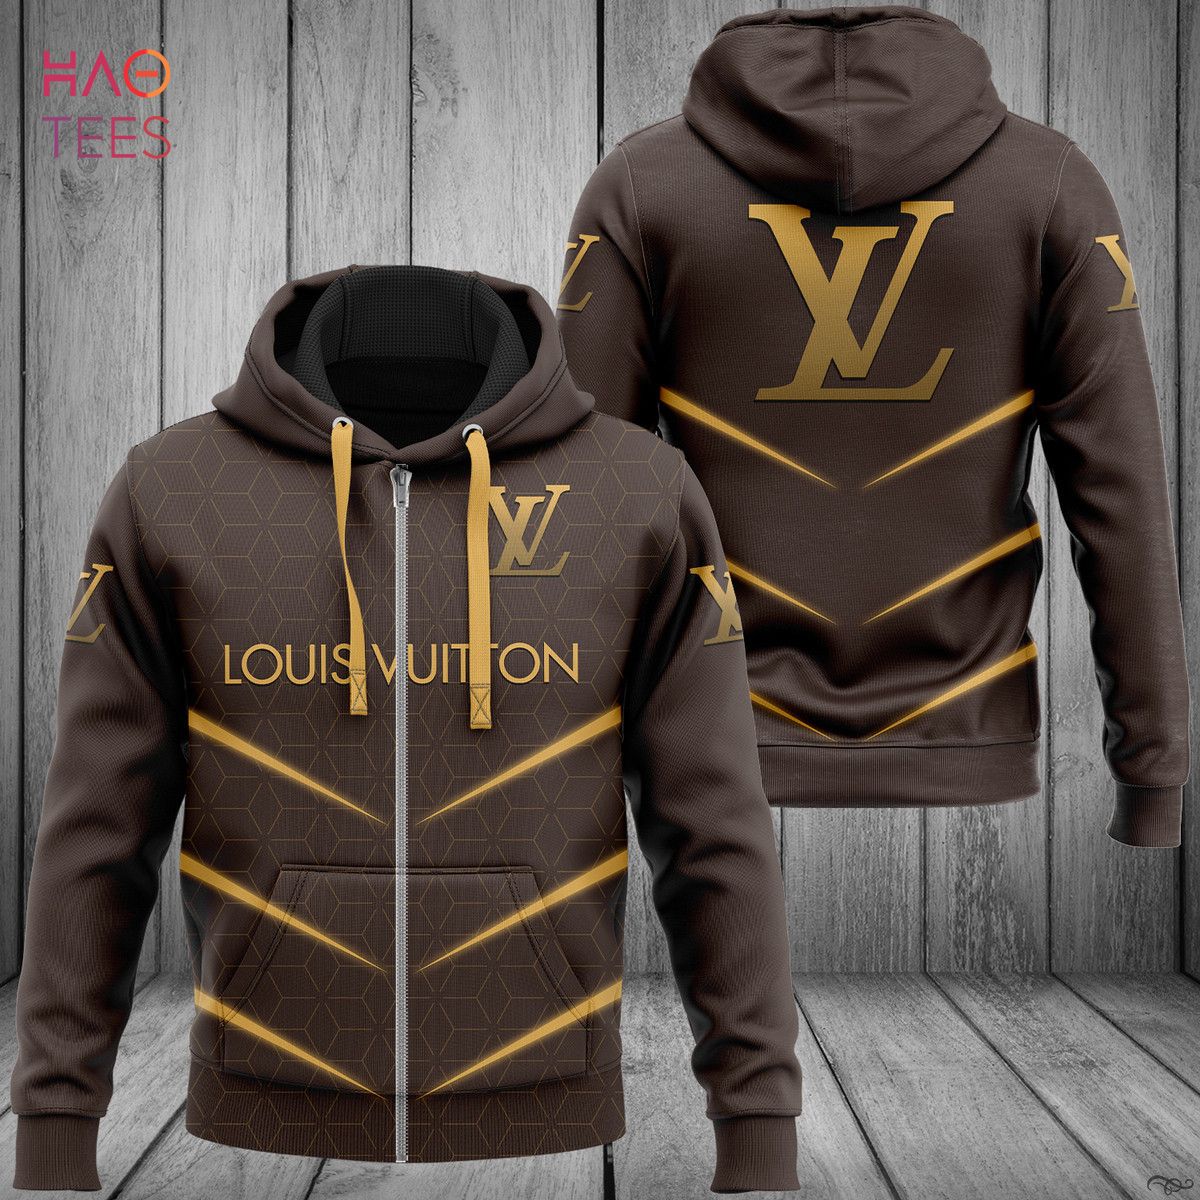 Louis Vuitton Nike Hoodie Long Pants 3d Set Lv Luxury Clothing Clothes  Outfit For Men - Family Gift Ideas That Everyone Will Enjoy